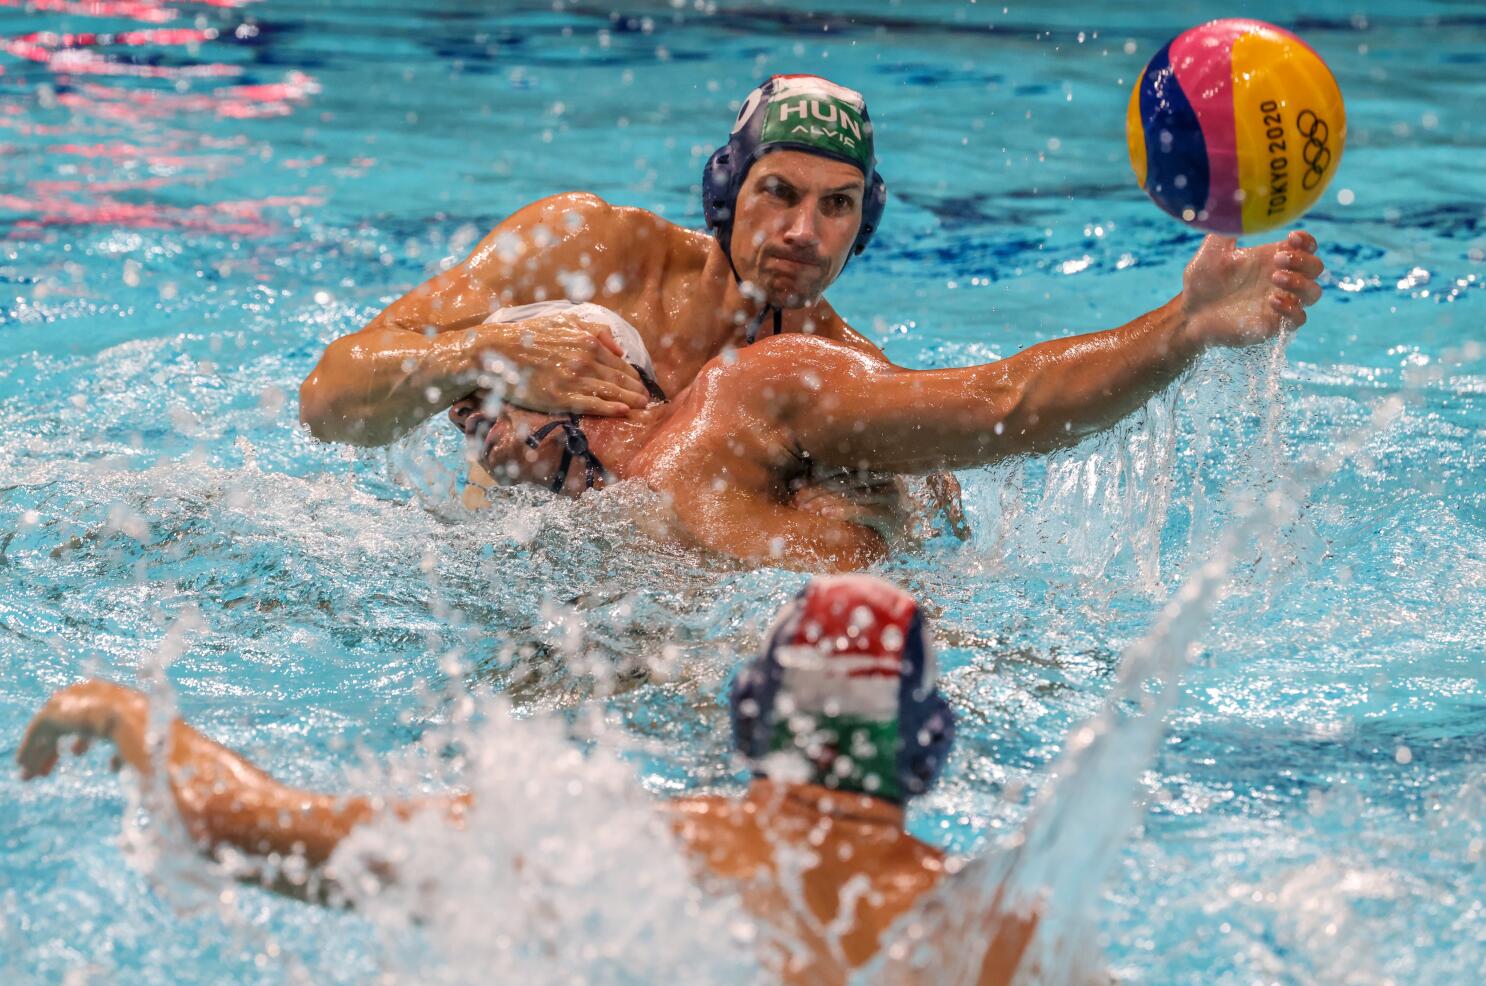 Water polo a mix of sports with some 'brutality' on the side - Los